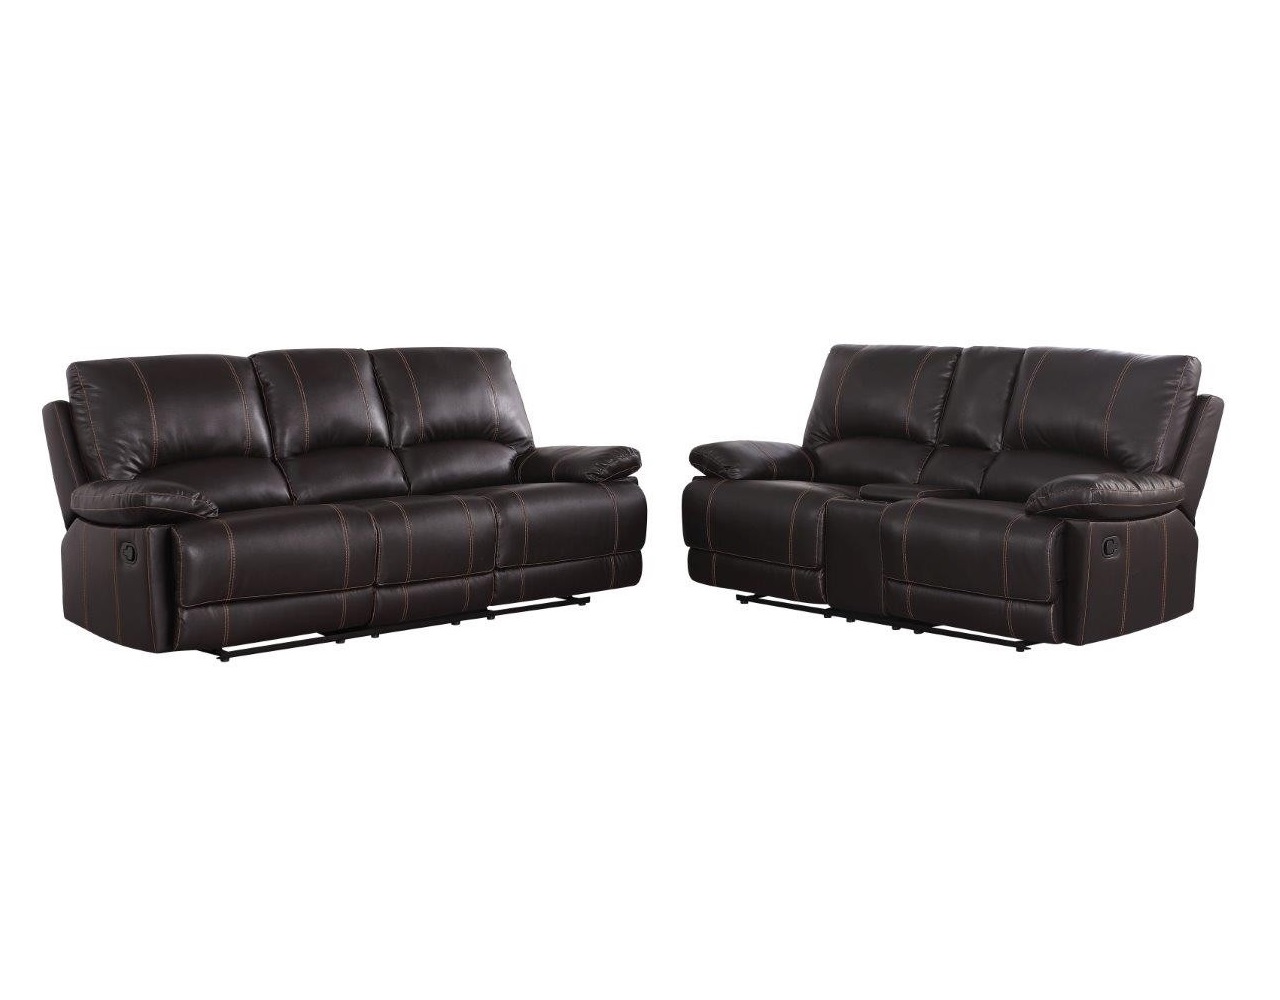 Two Piece Indoor Brown Faux Leather Five Person Seating Set-343907-1